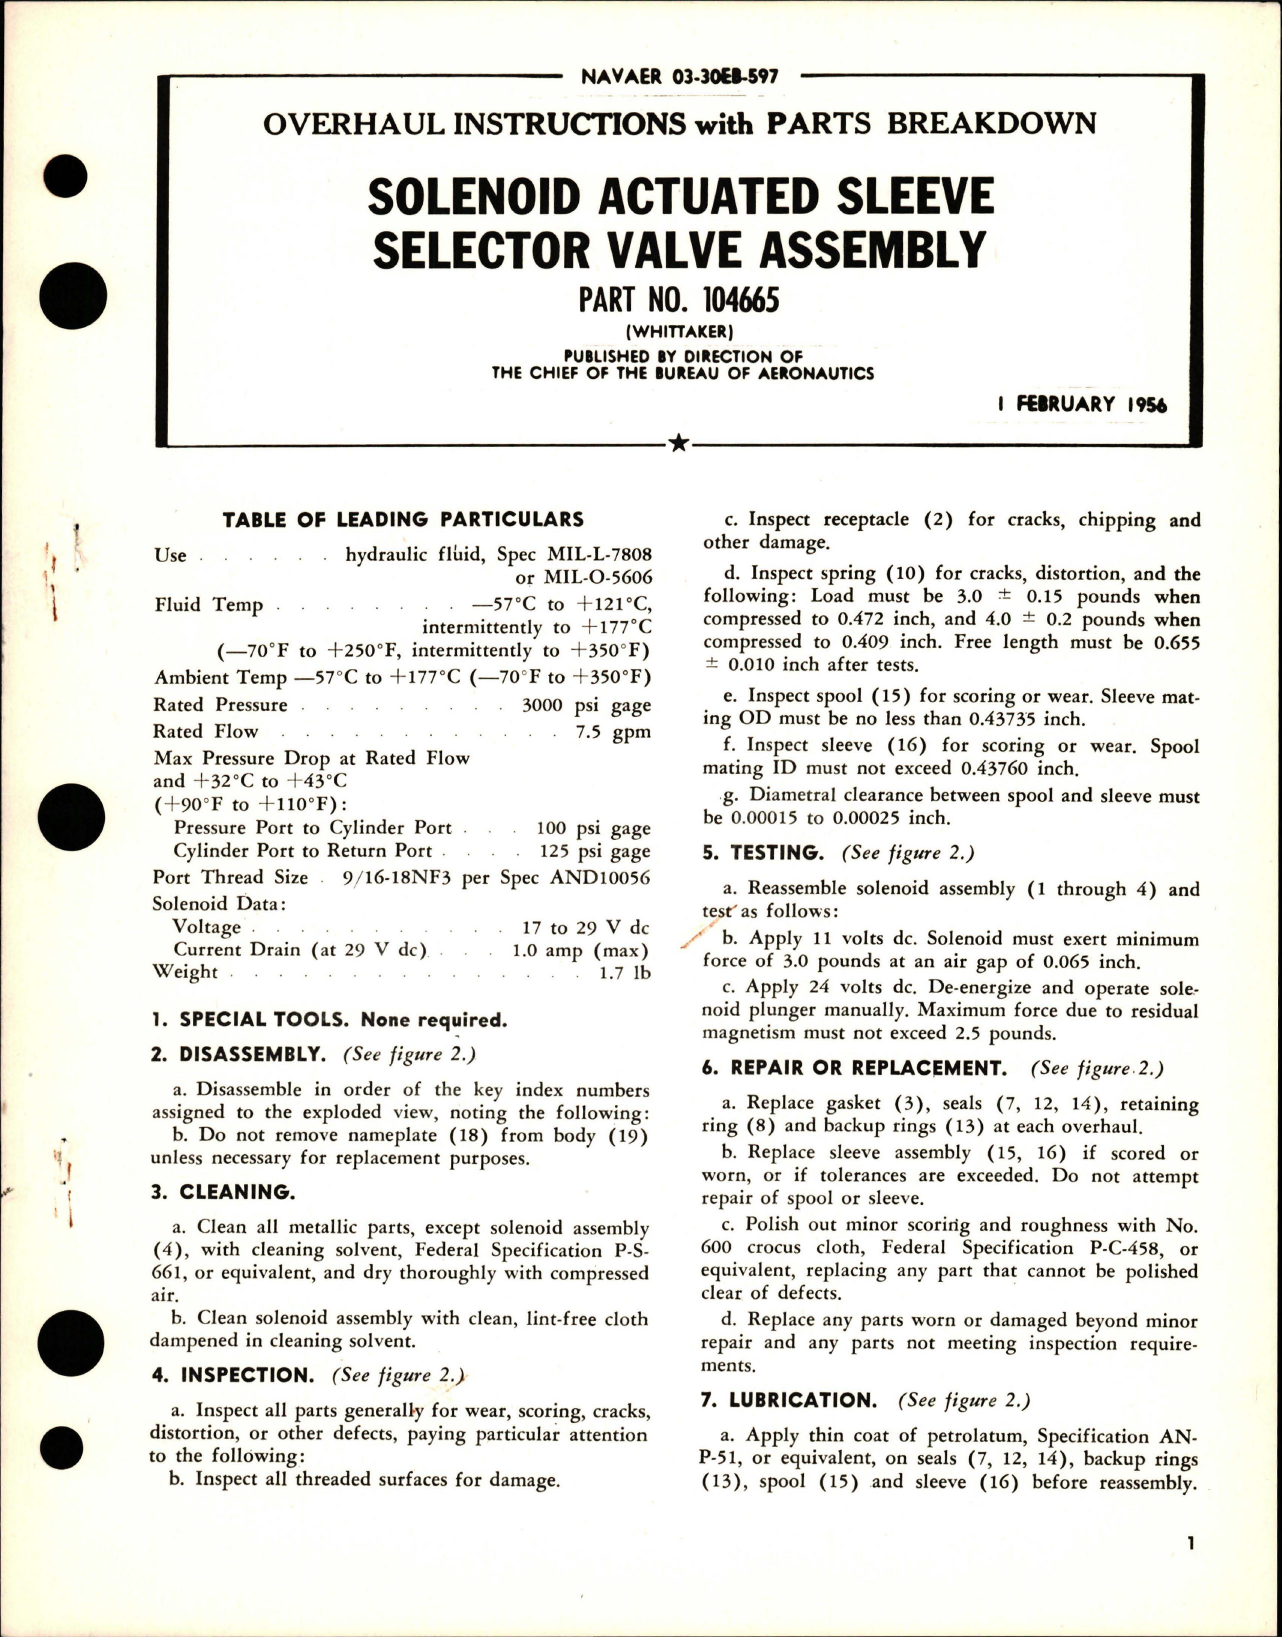 Sample page 1 from AirCorps Library document: Overhaul Instructions with Parts for Solenoid Actuated Sleeve Selector Valve Assembly - Part 104665